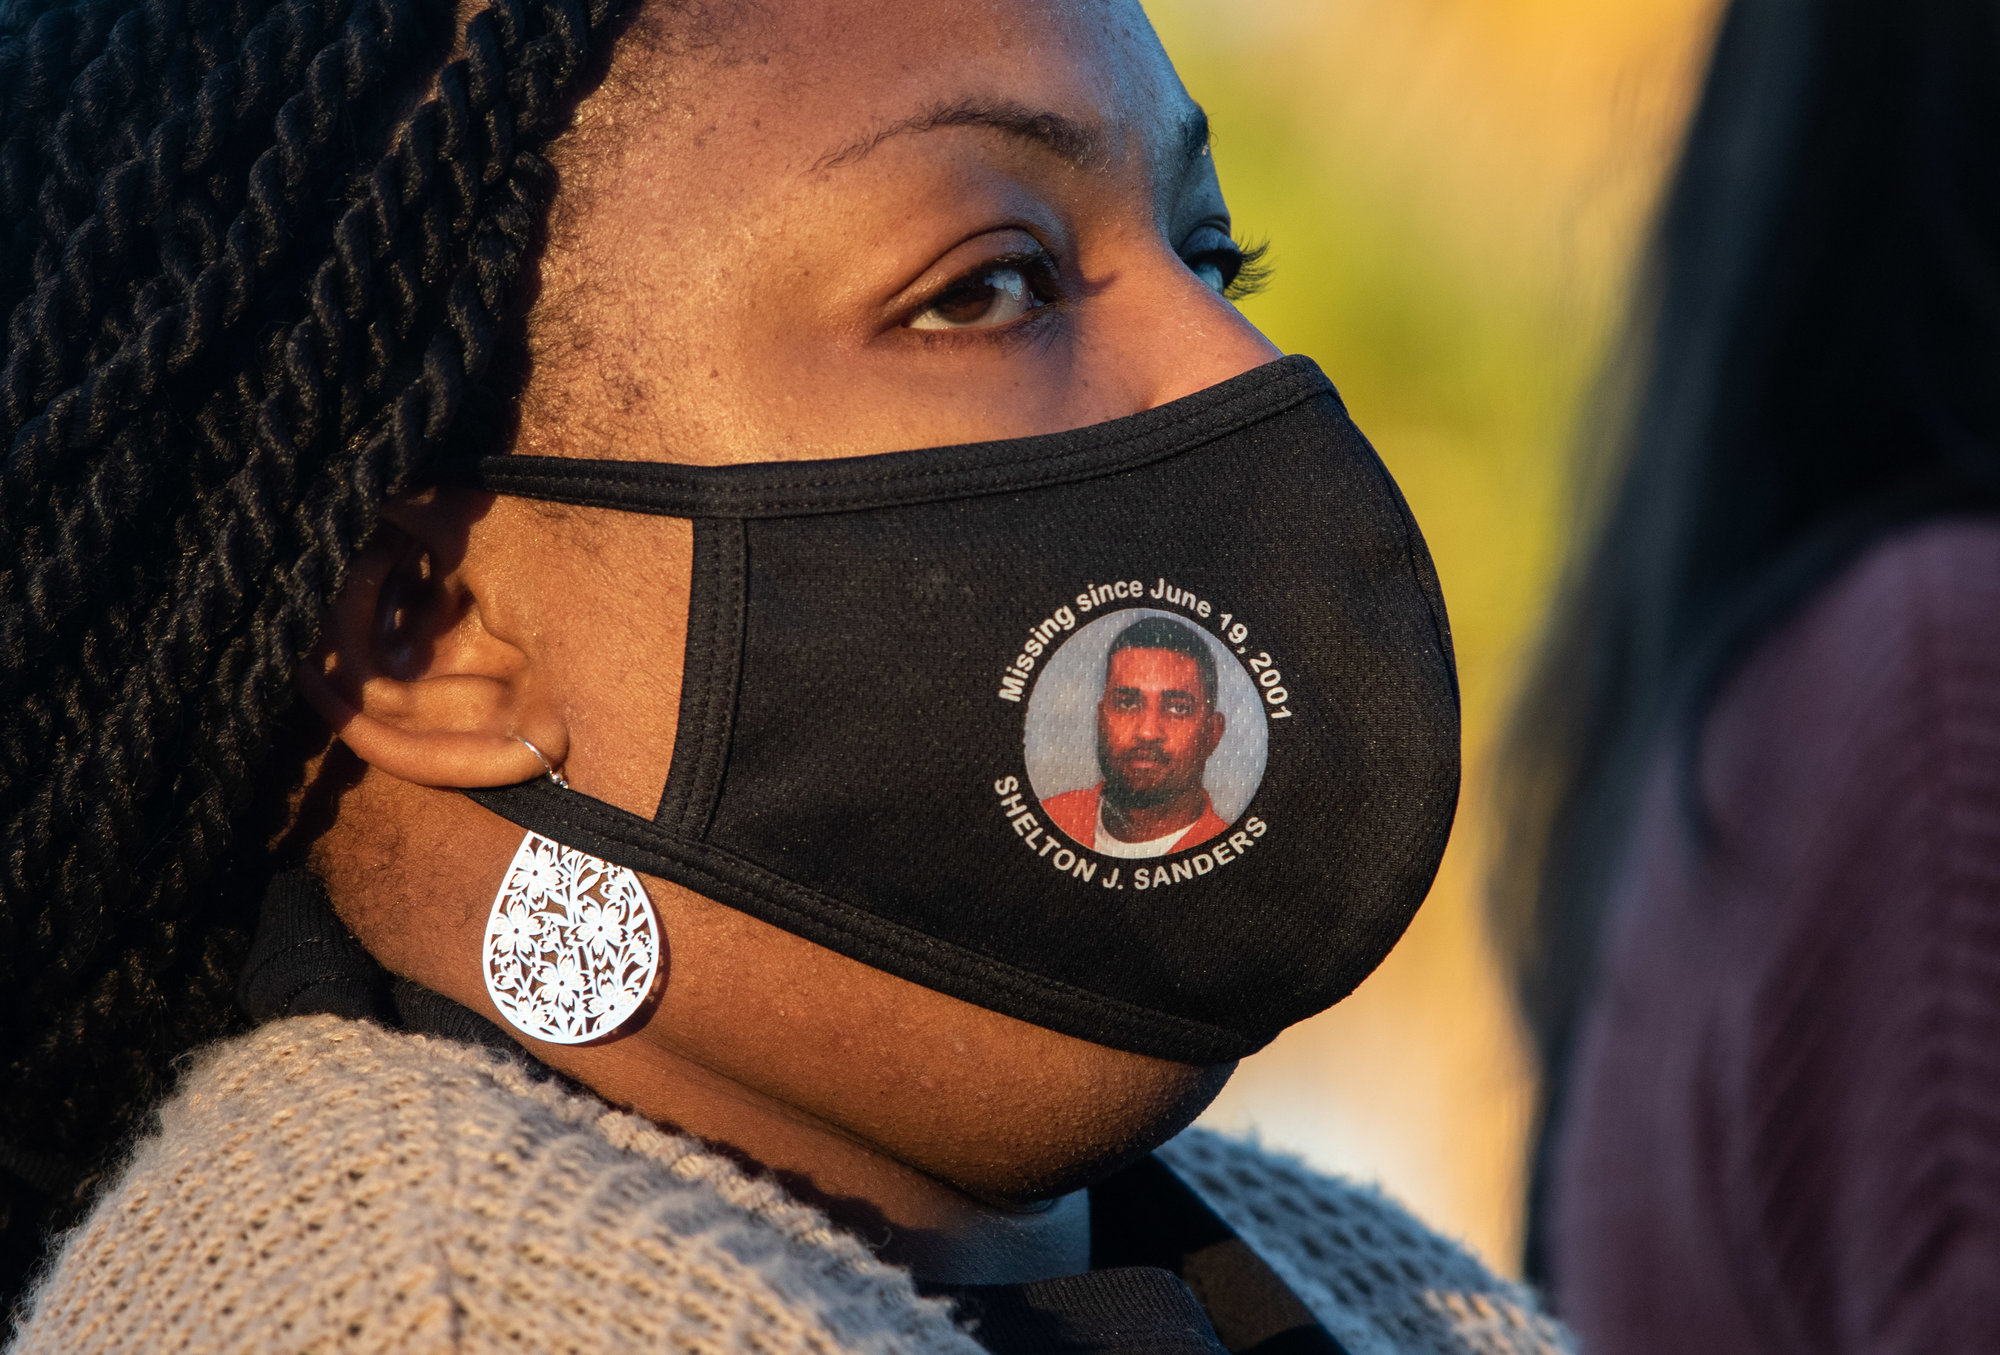 Wilveria Sanders wears a mask dedicated to Shelton, Sanders who went missing over 20 years ago on June 19, 2001.